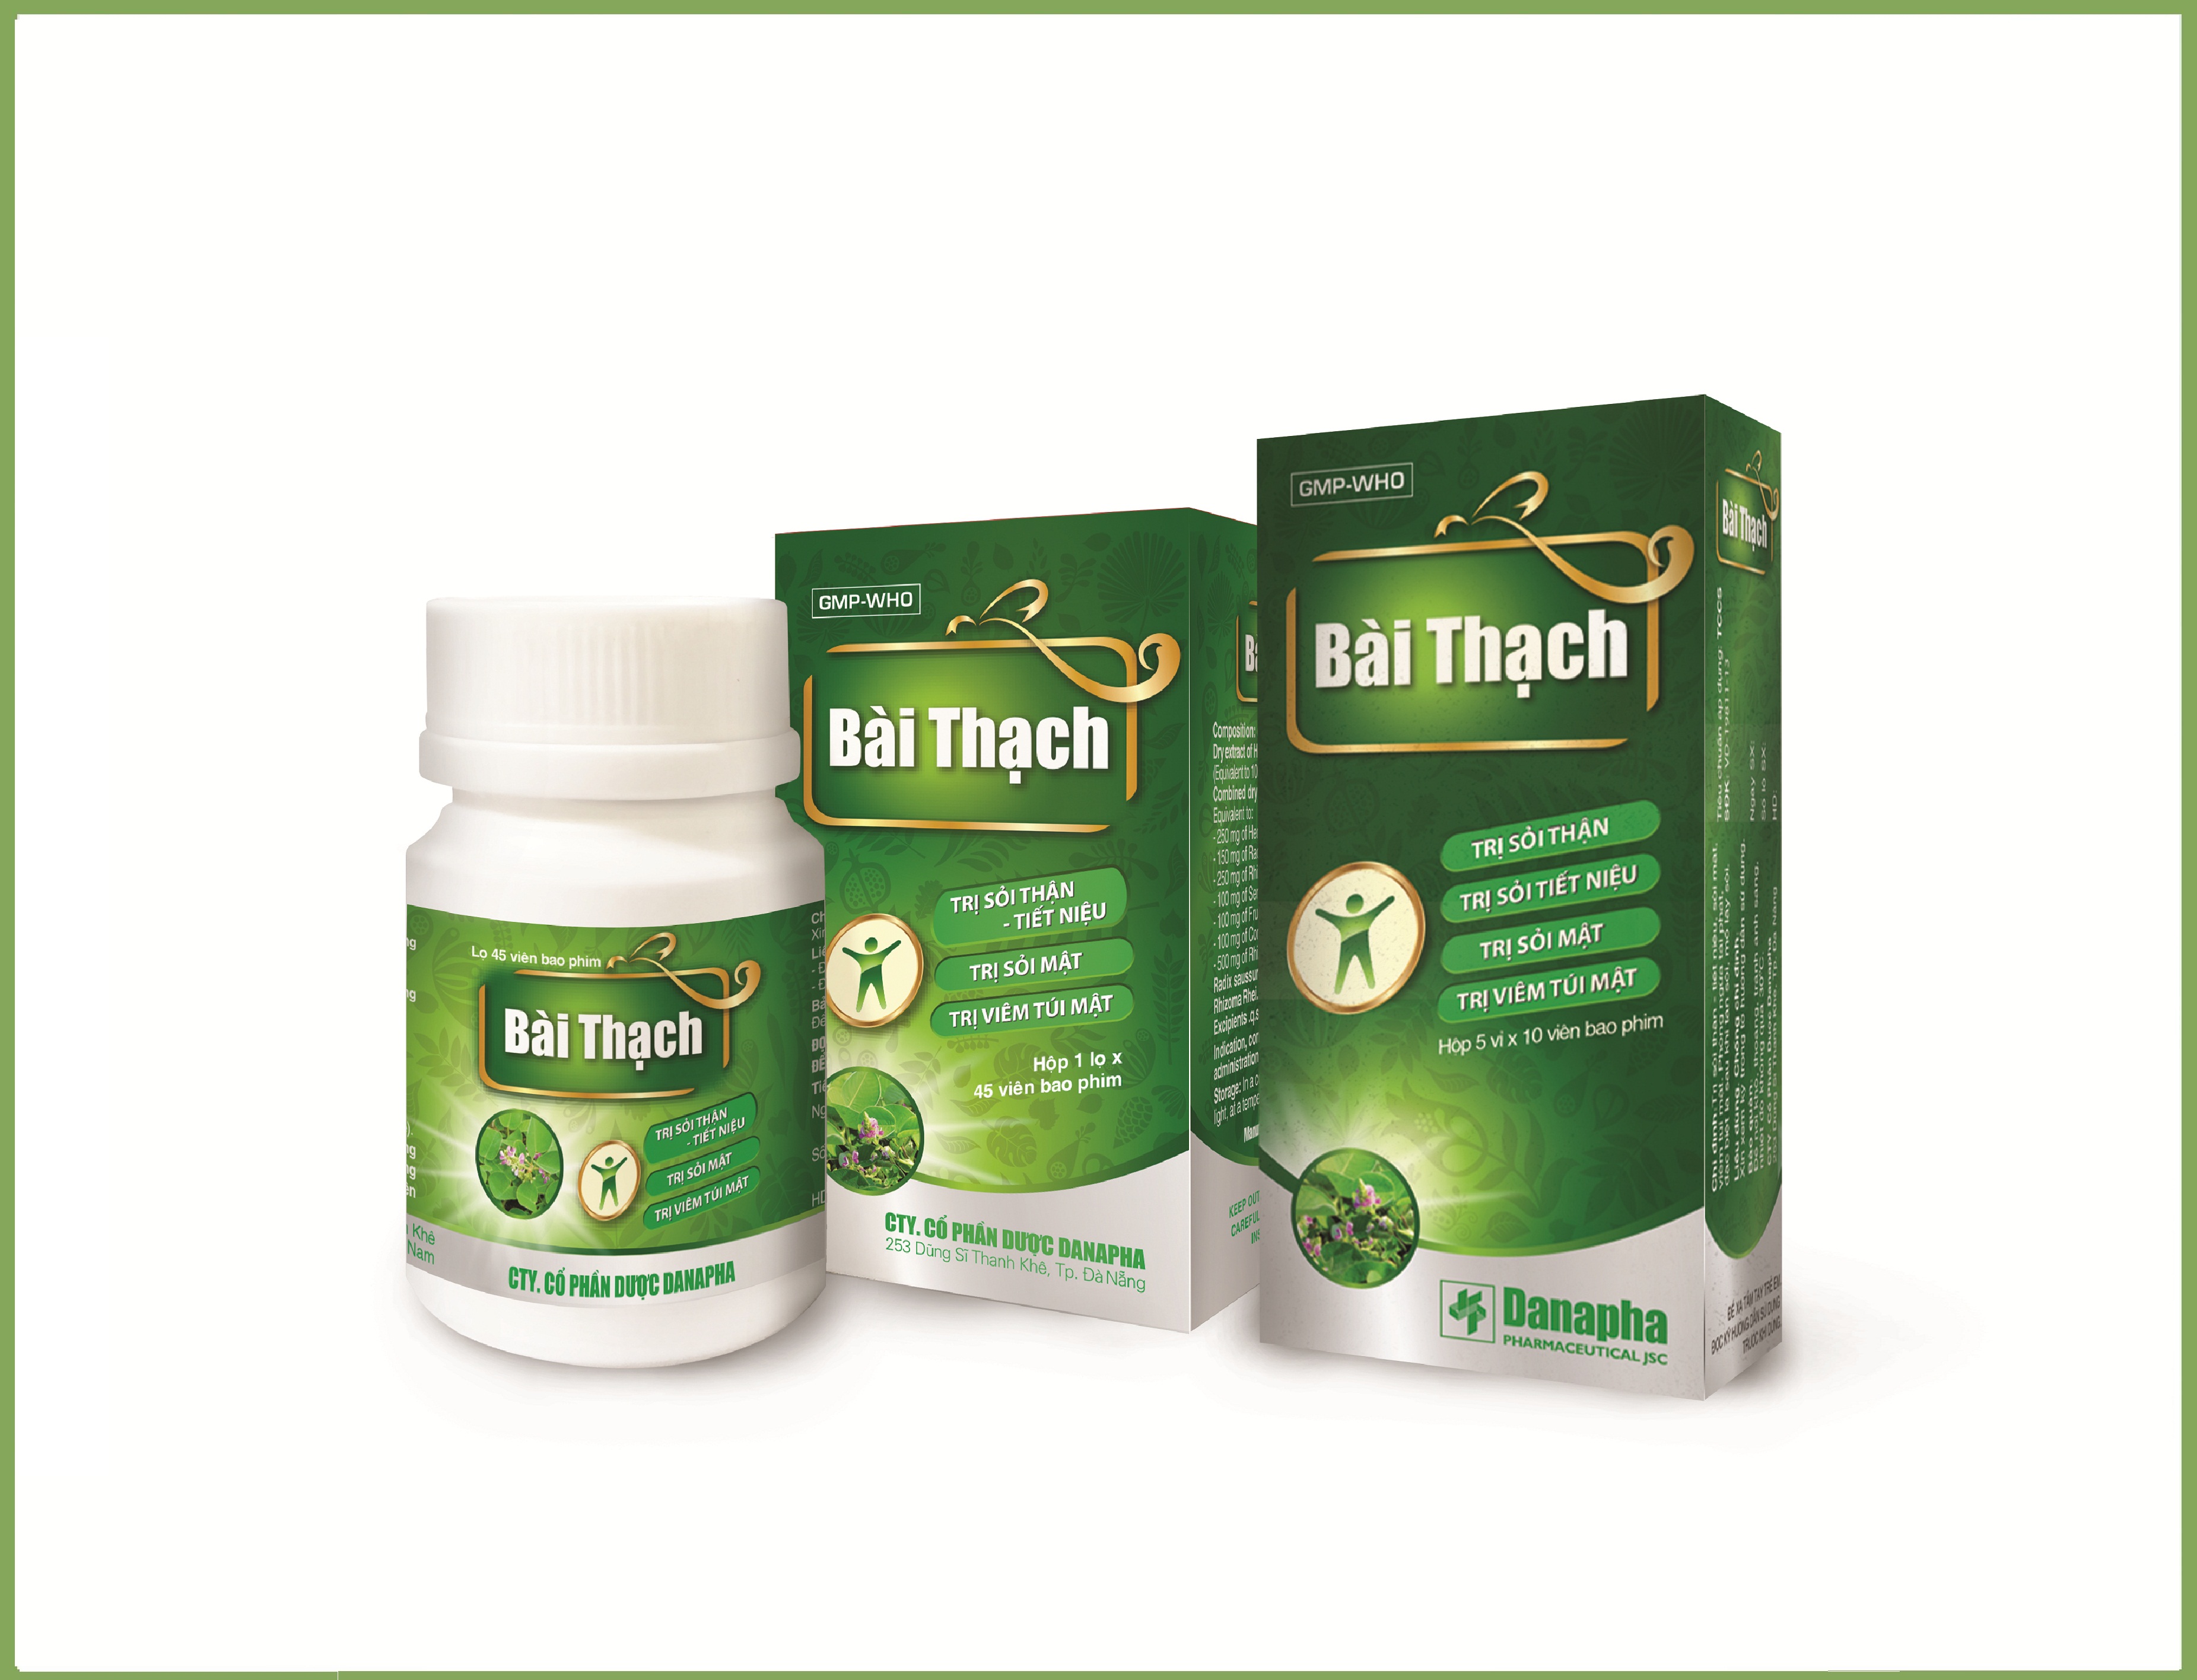 Bai Thach - The conscience of manufacturer